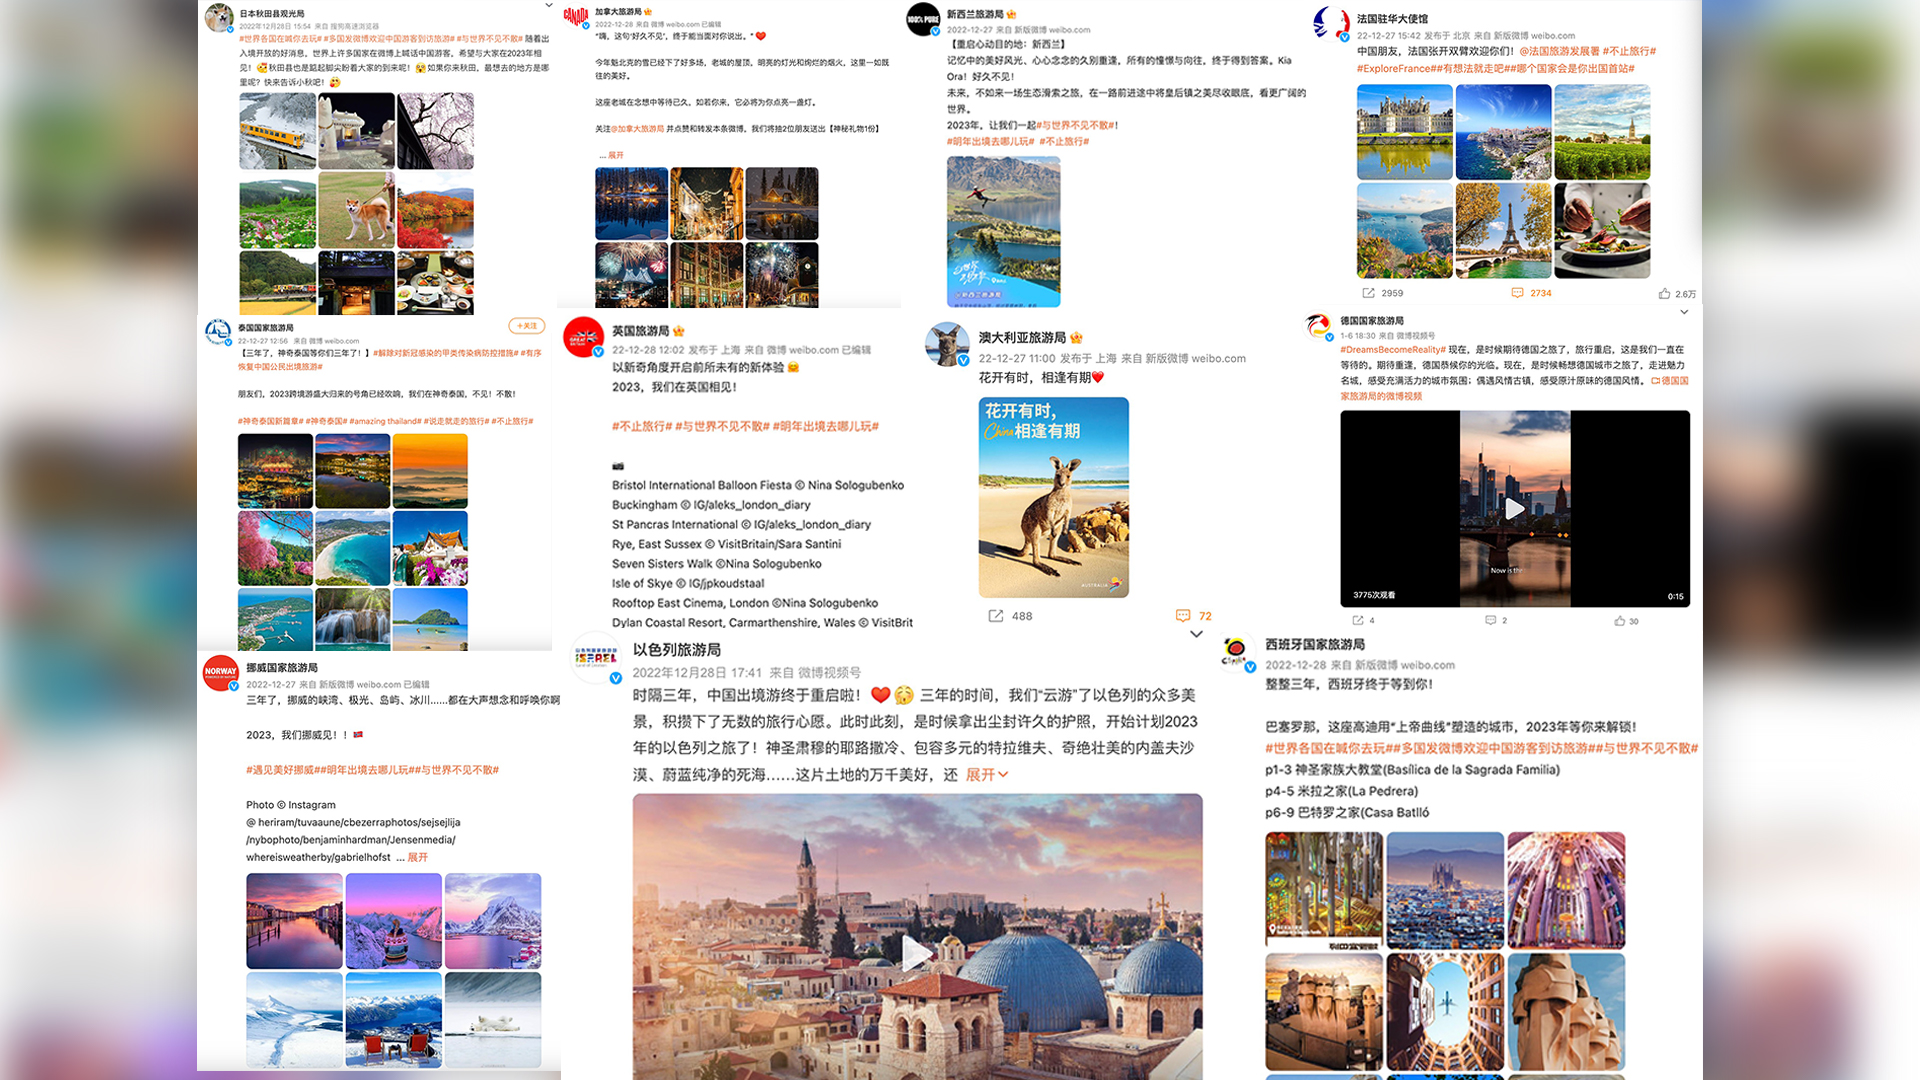 On China's Twitter-like service Weibo, governments worldwide posted photos and videos of famous tourist attractions to leave an impression on prospective Chinese travelers shortly after China announced the lifting of its COVID-19 travel restrictions.